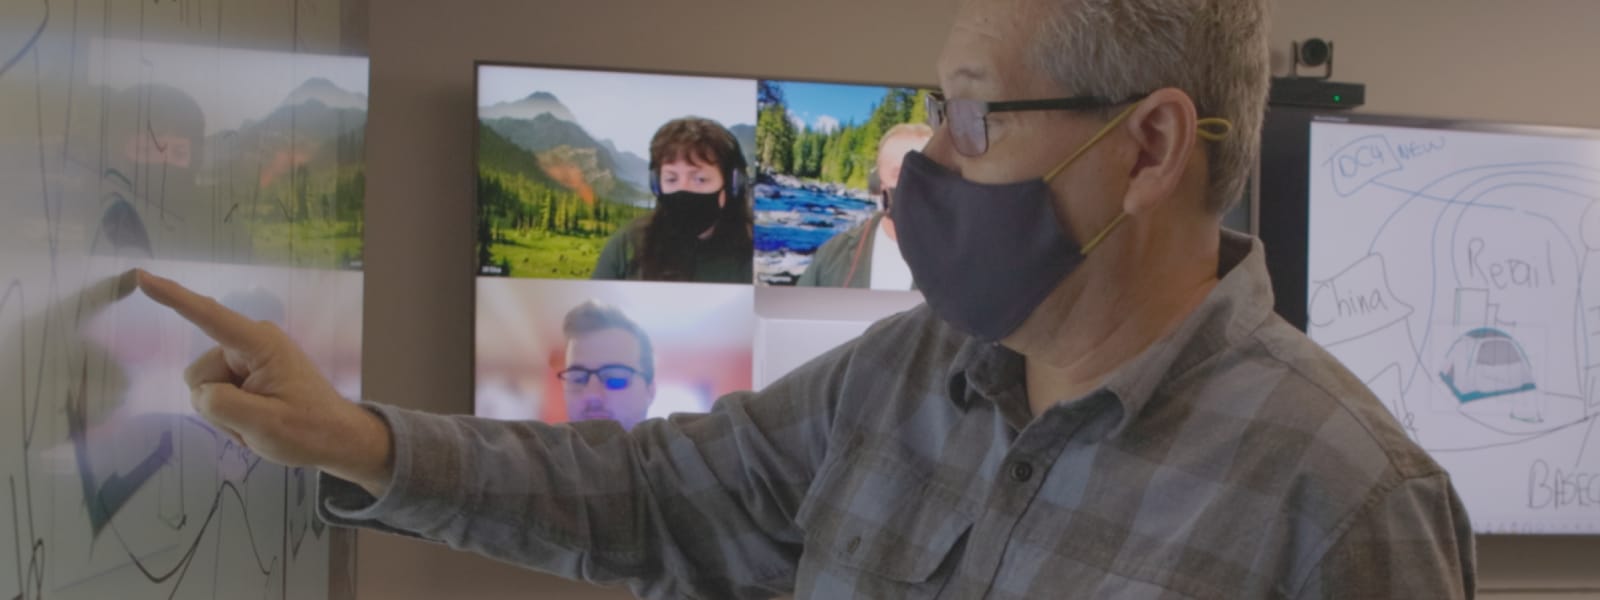 A person wearing a mask pointing to a whiteboard for a Teams video call